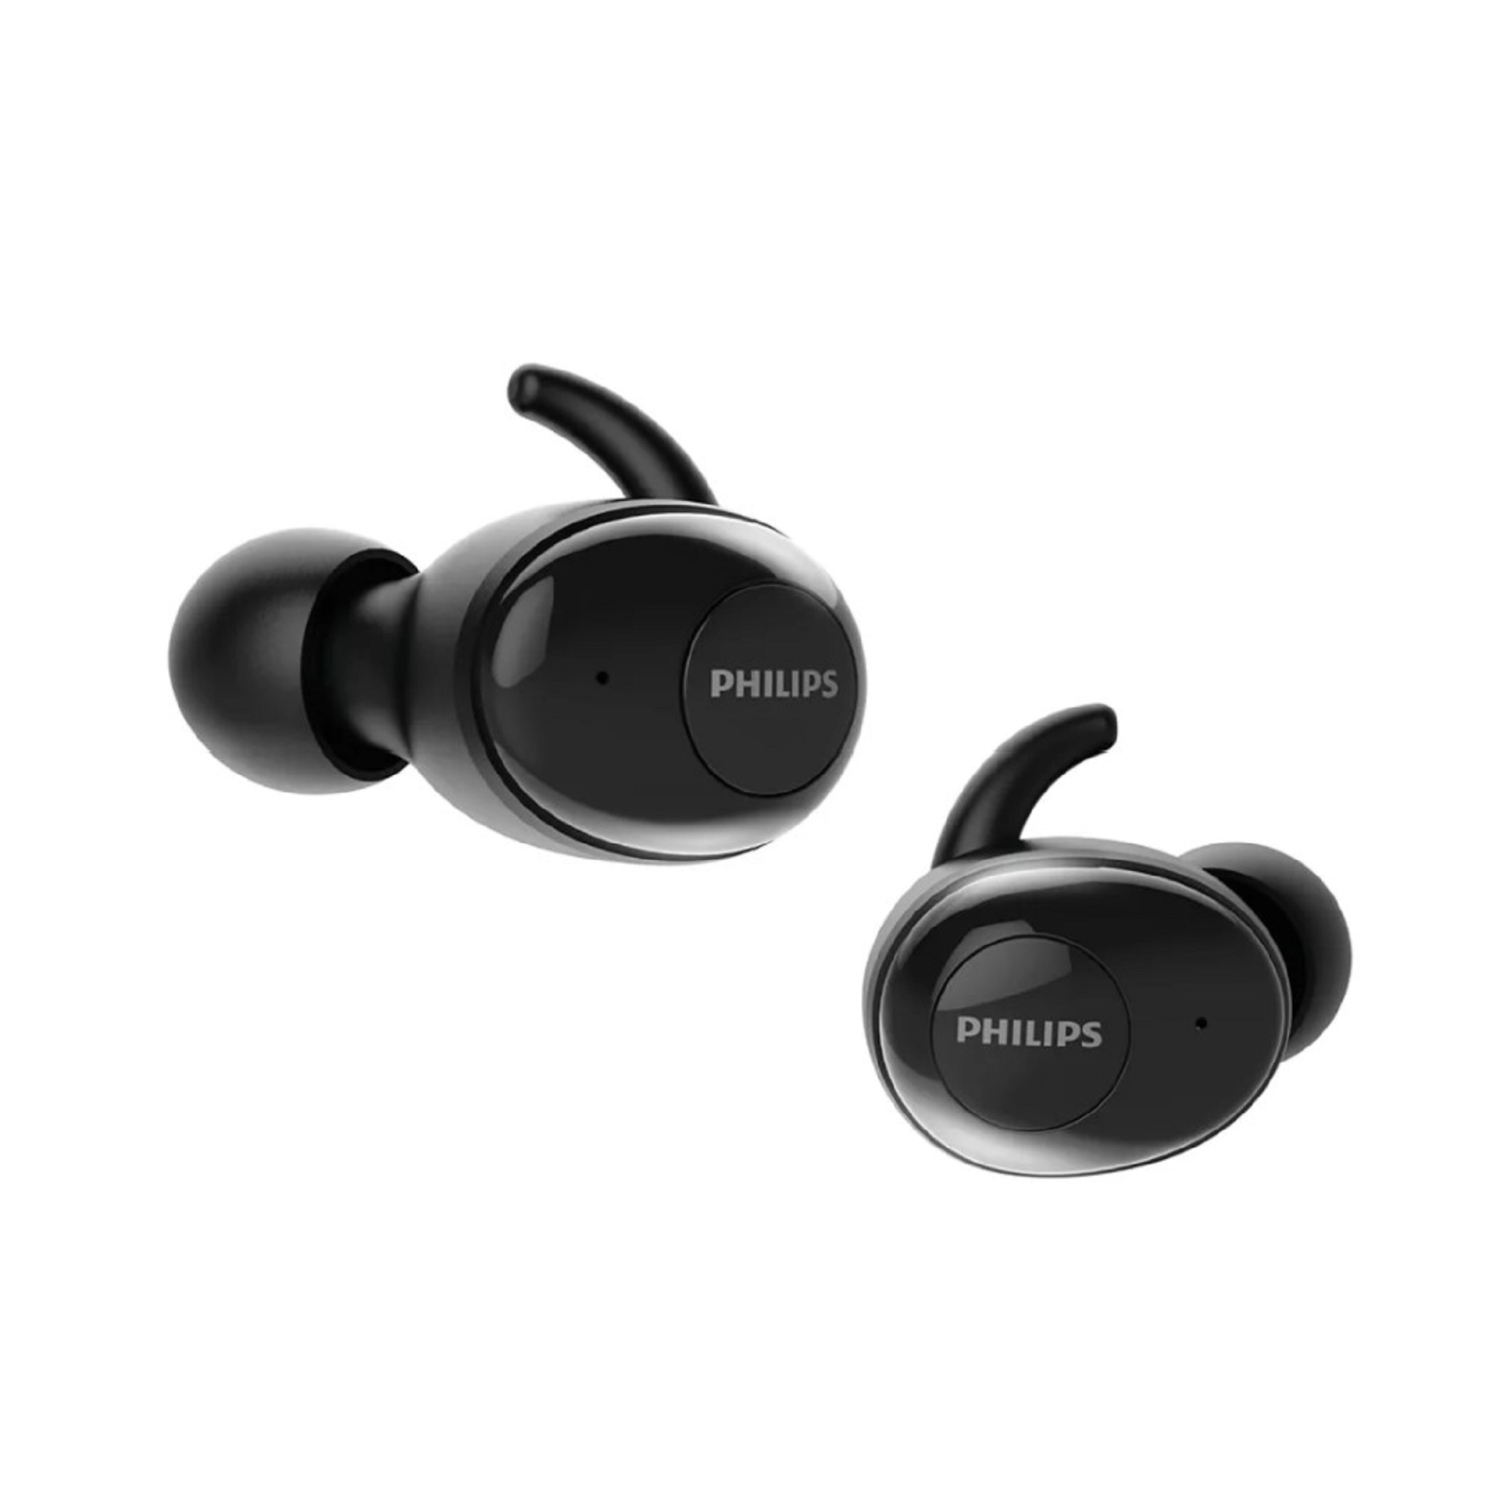 Philips In-ear true wireless headphones with 6MM Drivers, and built-in 3350 mAH power bank charging case - SHB2515BK/10 Black